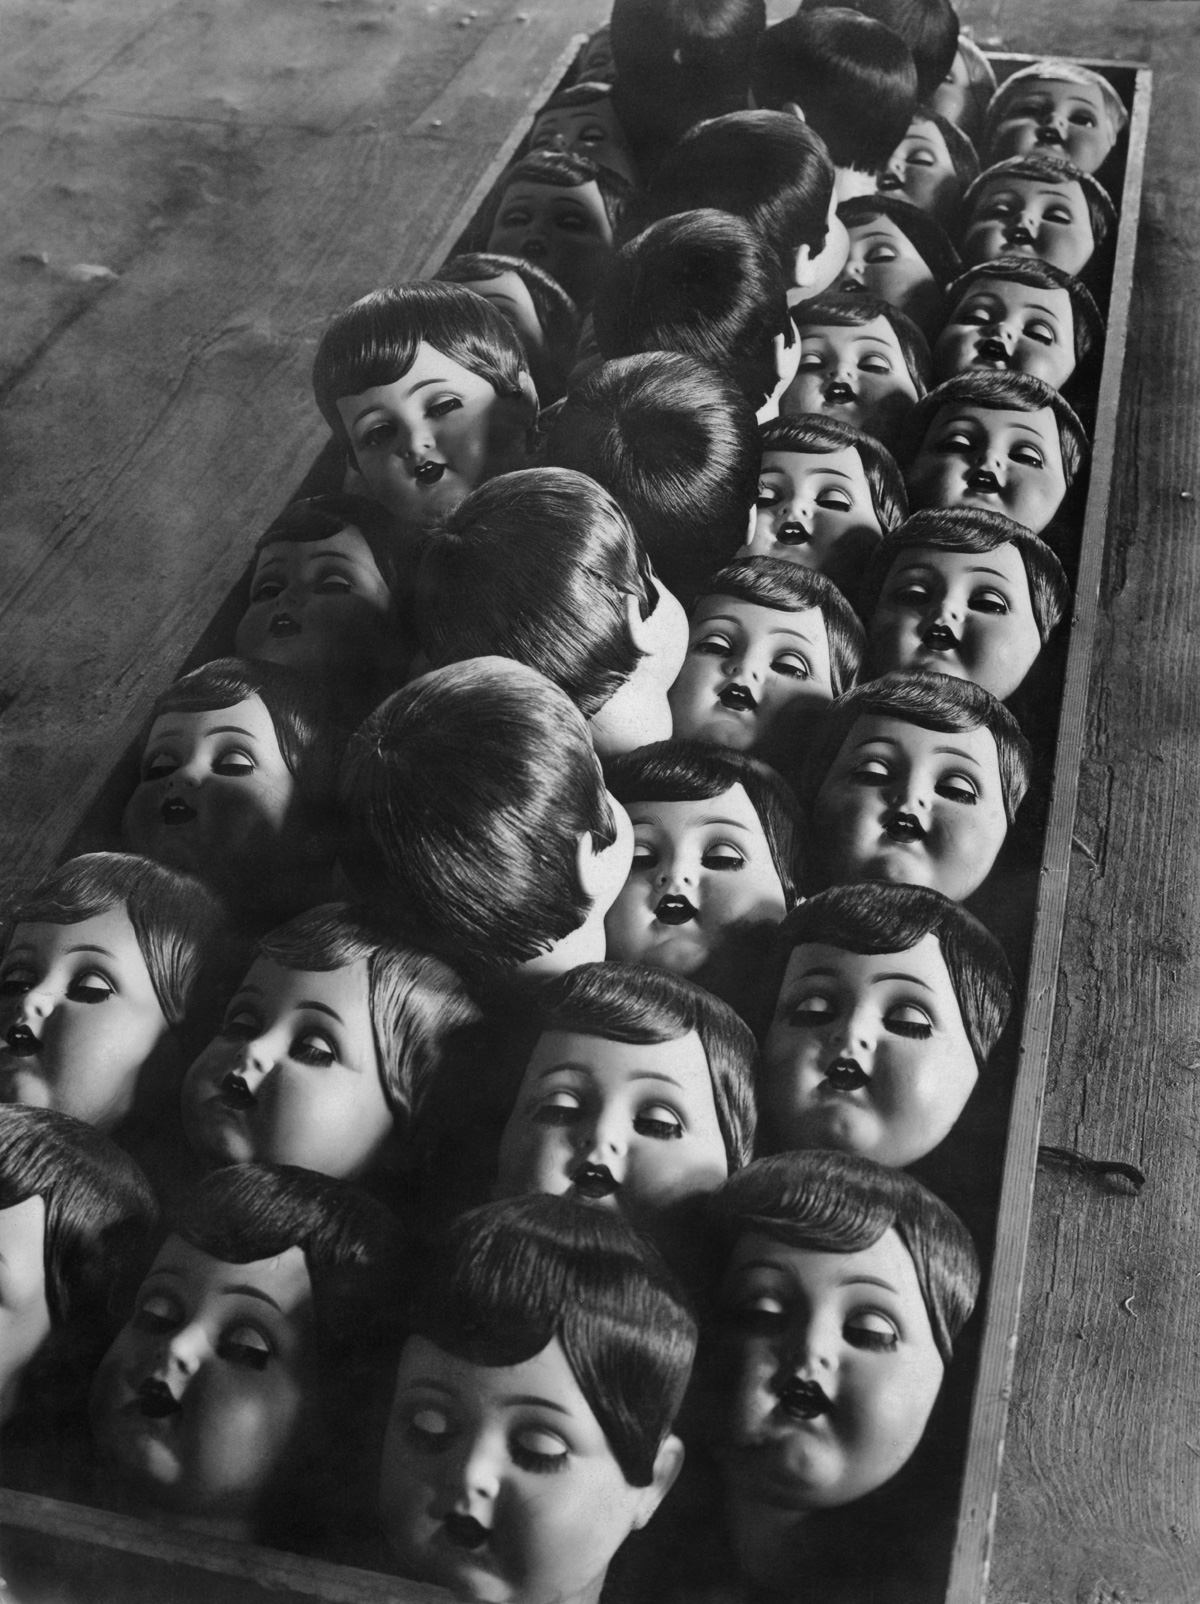 The row of dolls heads in a factory in Germany circa 1950. (Photo by FPG/Getty Images)